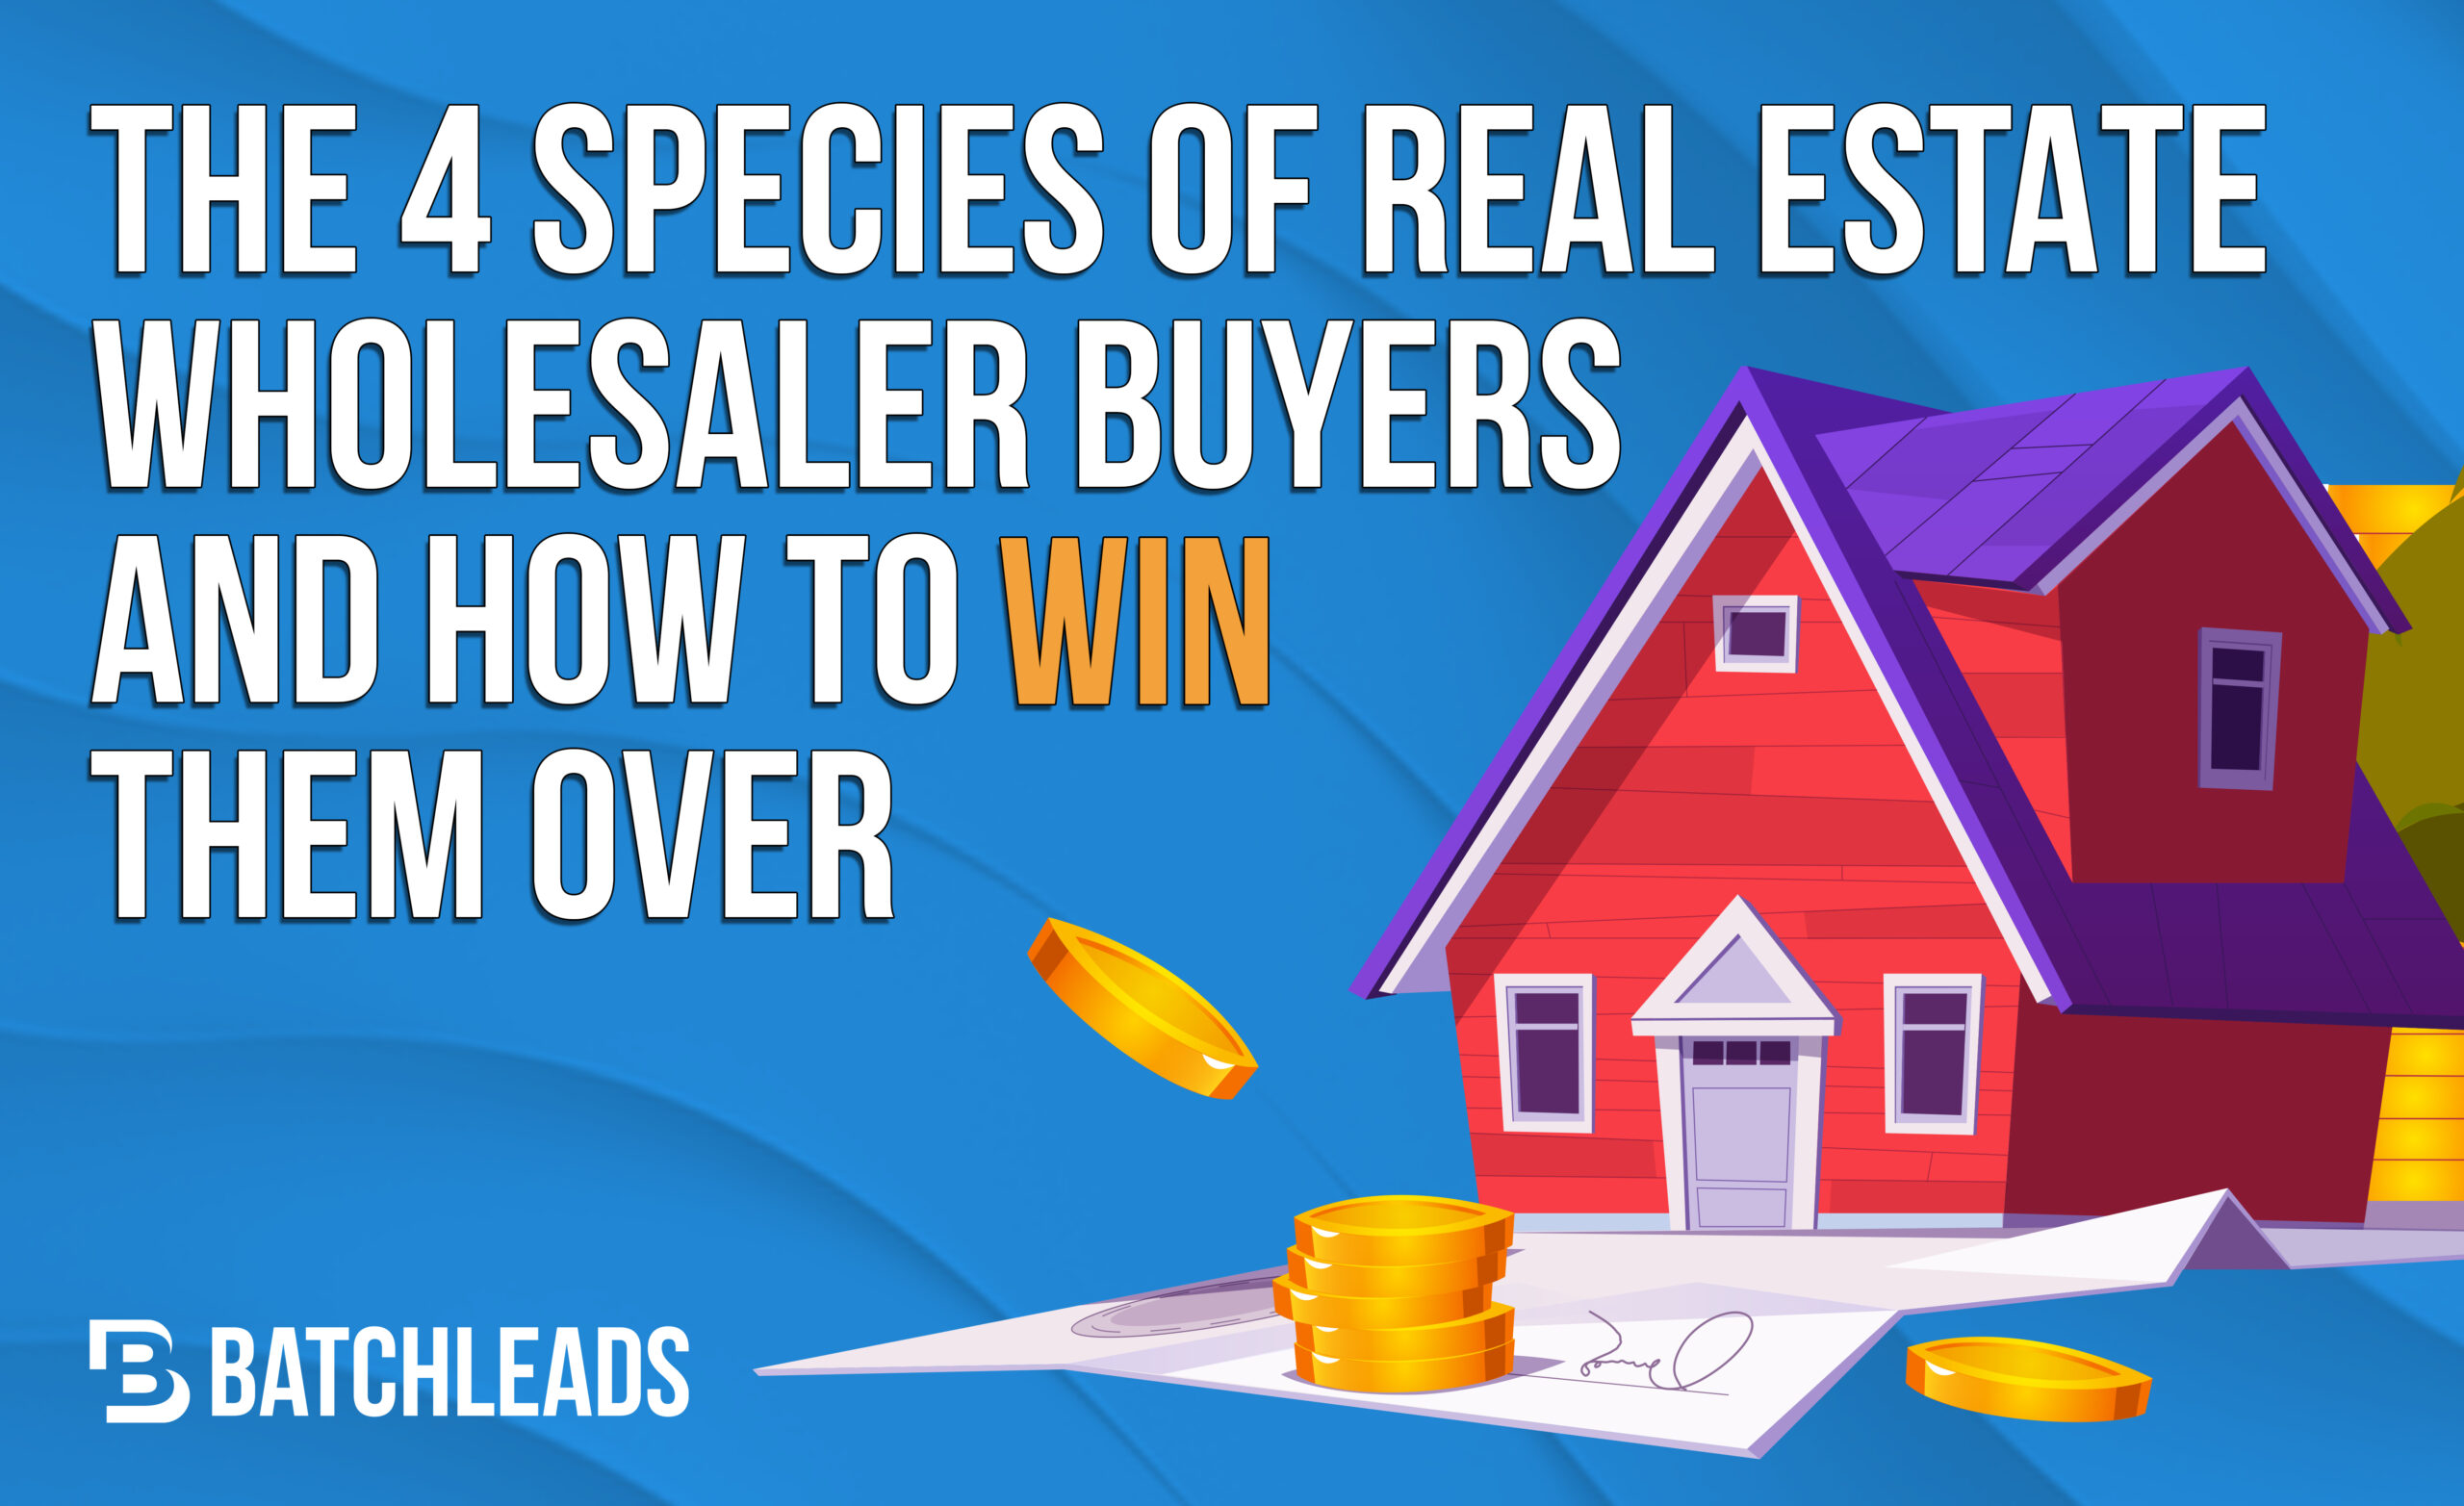 THE 4 SPECIES OF REAL ESTATE WHOLESALER BUYERS AND HOW TO WIN THEM OVER